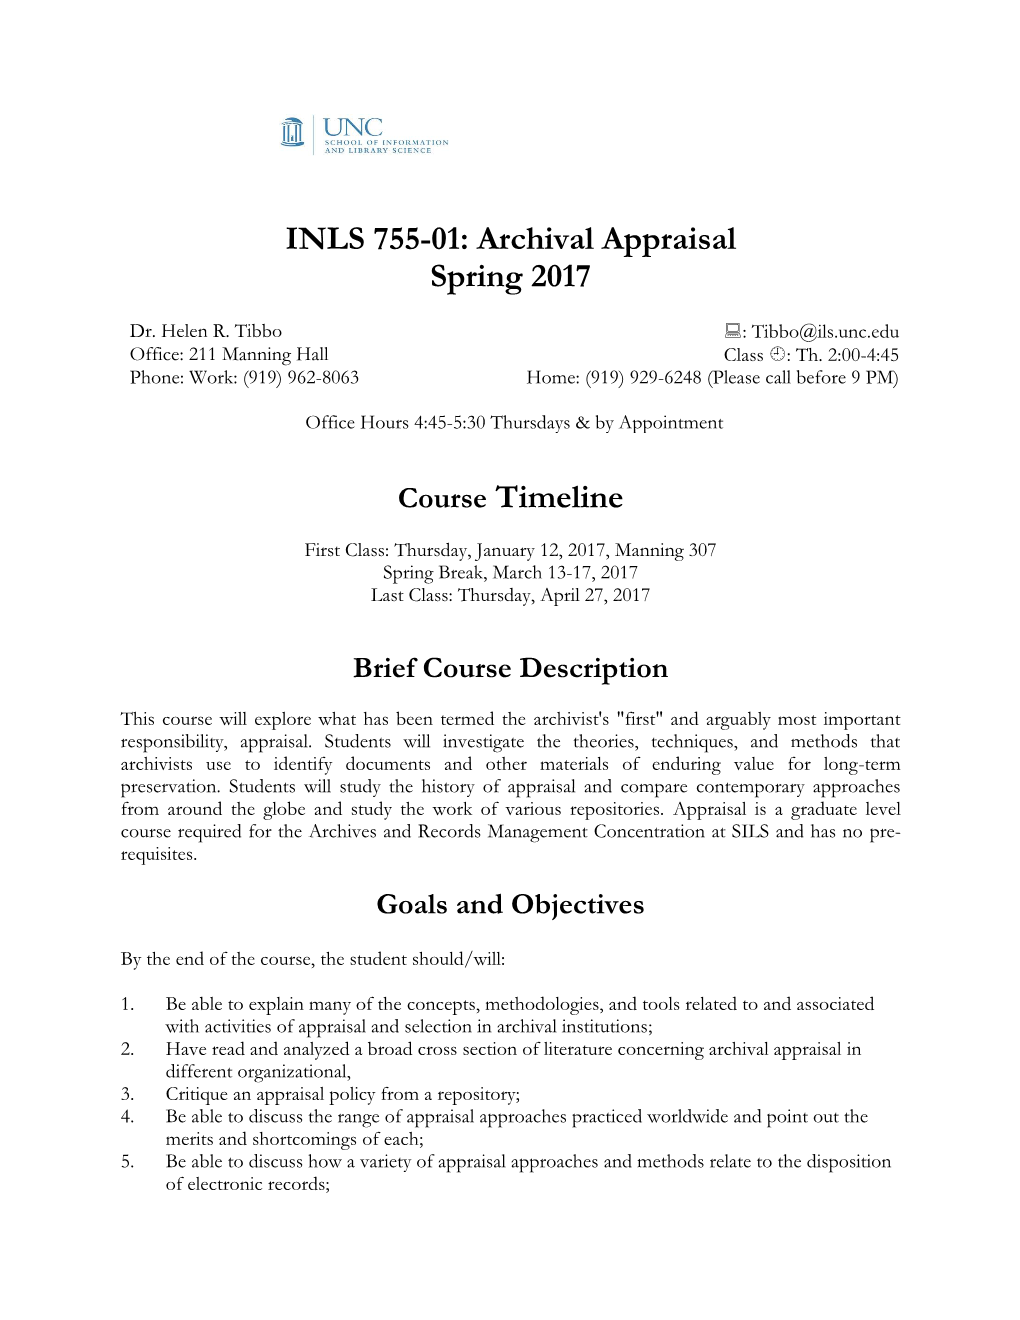 INLS 755-01: Archival Appraisal Spring 2017 Course Timeline